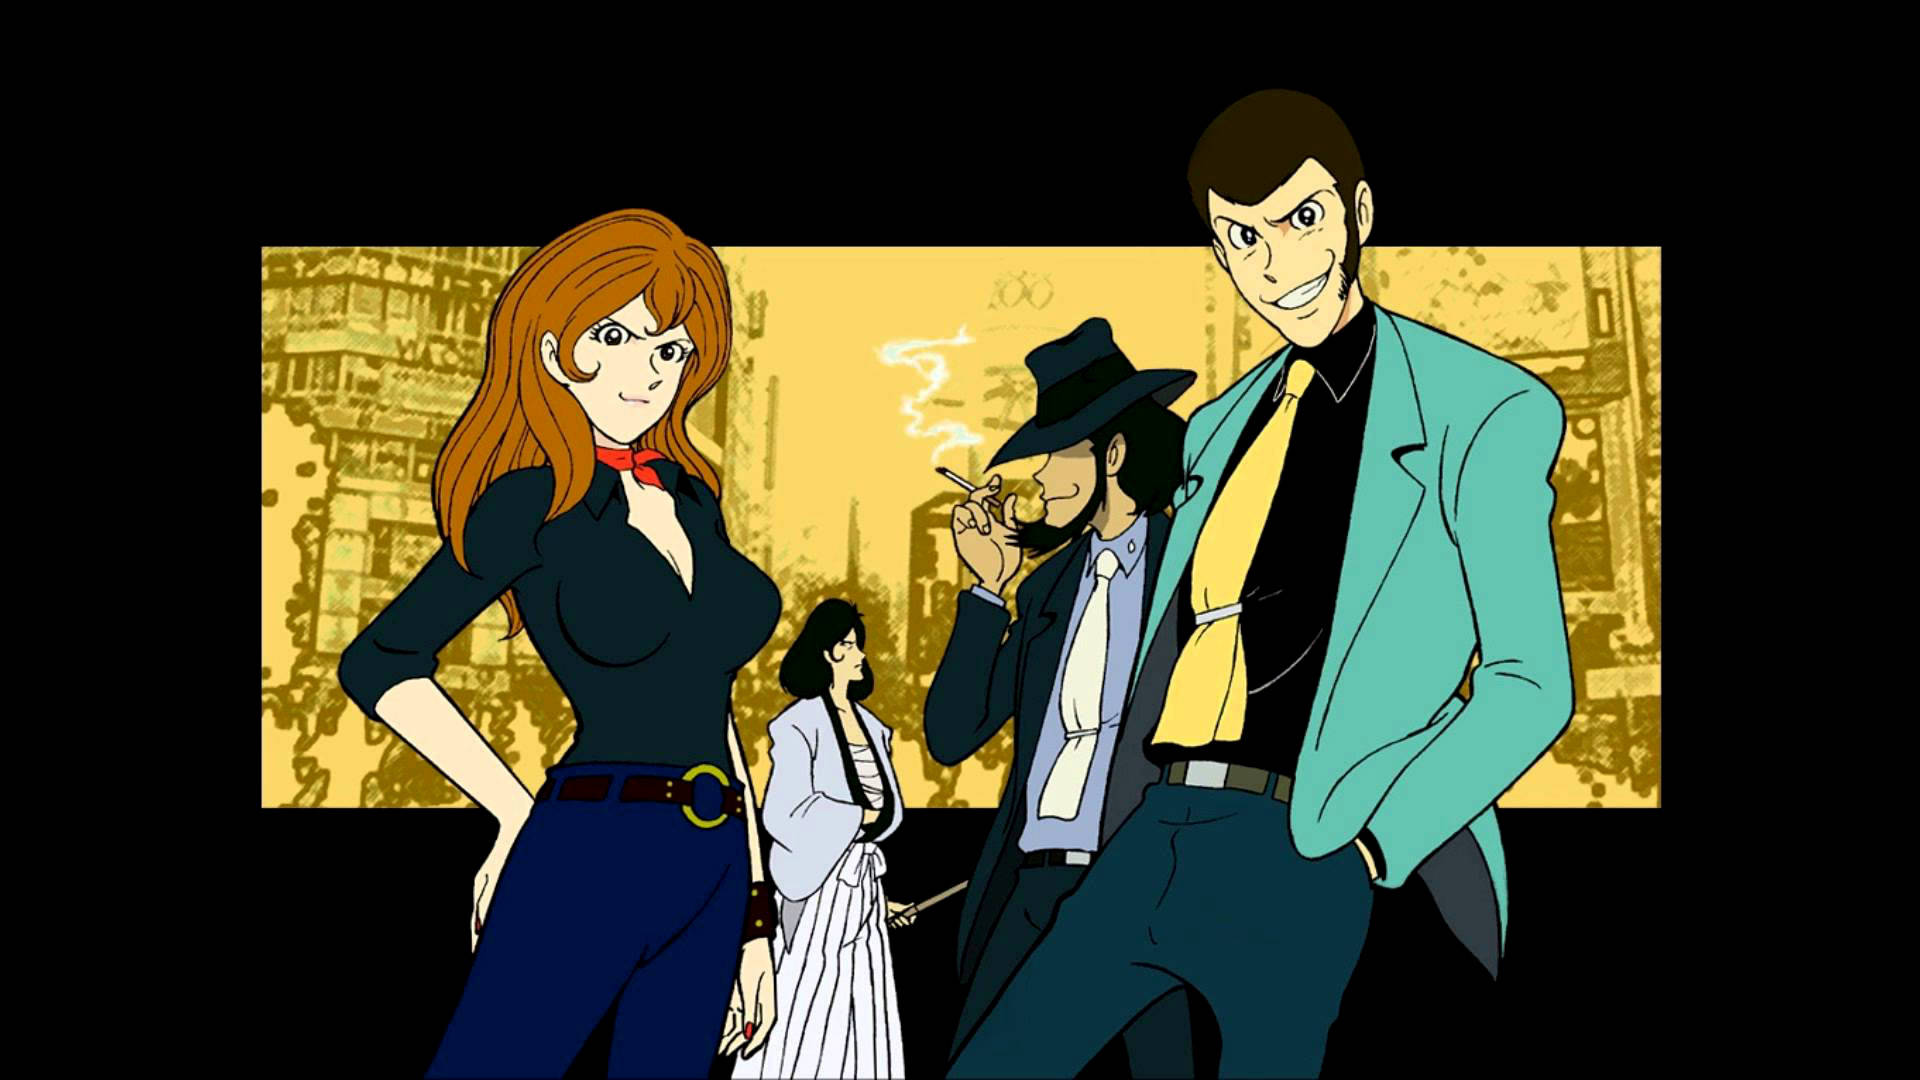 Top 999+ Lupin The Third Wallpapers Full HD, 4K✅Free to Use